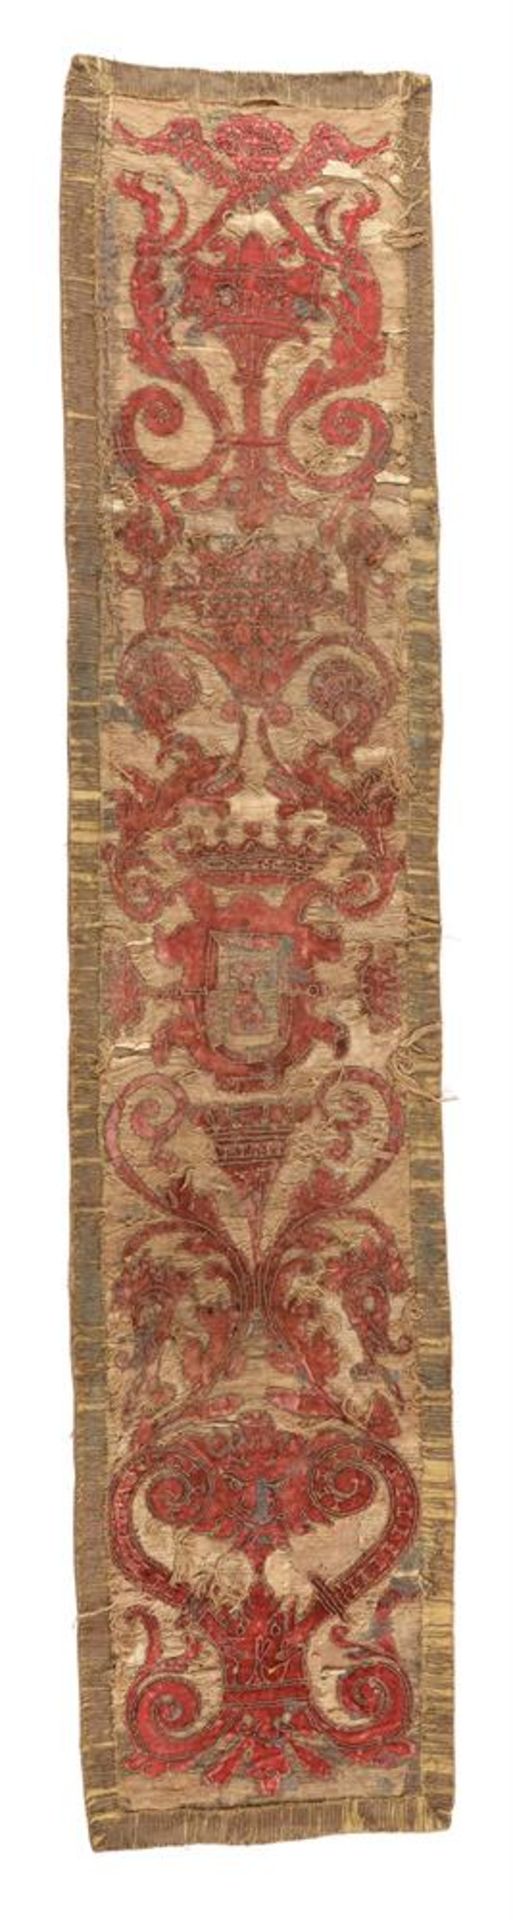 TEXTILES TO INCLUDE EARLY ORPHREY FRAGMENTS, LATE 16TH CENTURY AND LATER - Image 5 of 8